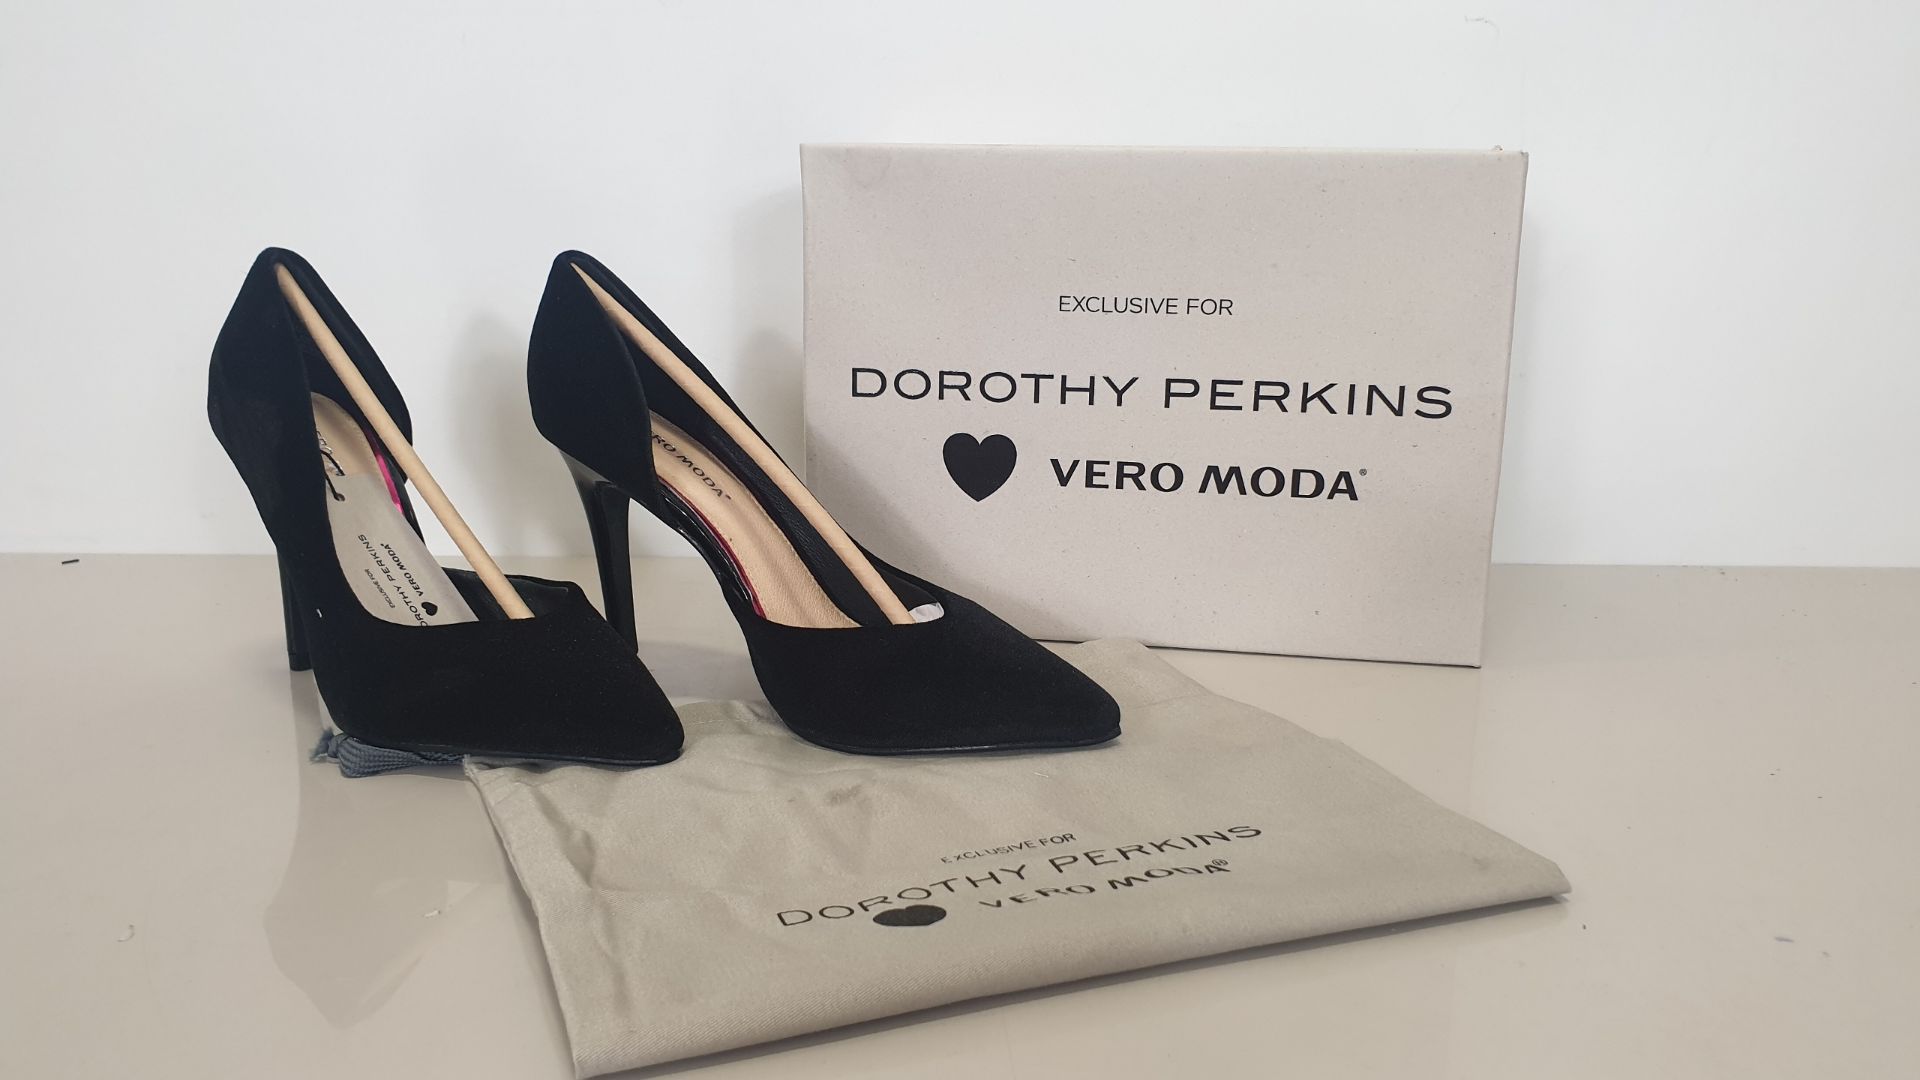 10 X BRAND NEW PAIRS OF PAIRS OF SIZE 5 DOROTHY PERKINS BLACK PIN HEEL SHOES - VERA MODA EXCLUSIVE -